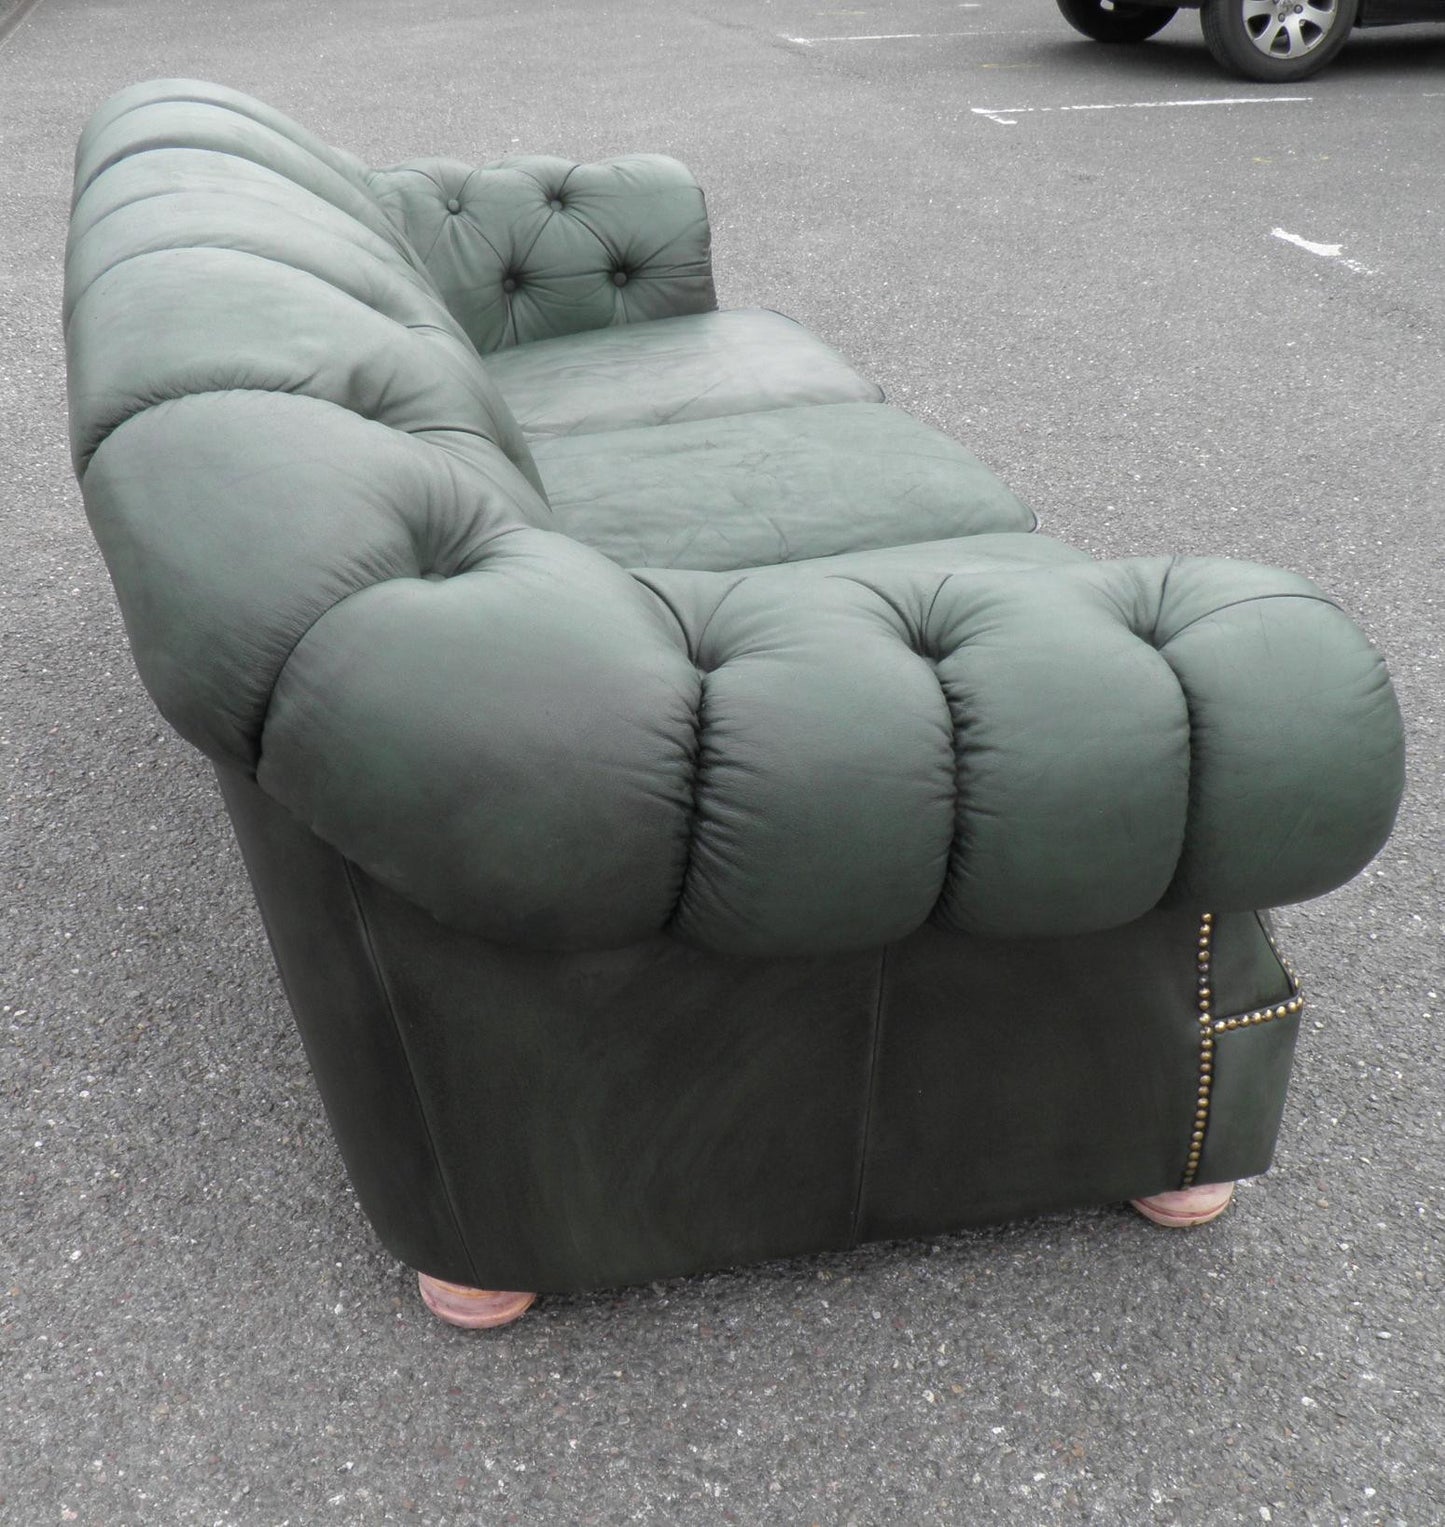 Vintage Green Scrubbed Leather Camel Back Chesterfield Sofa.